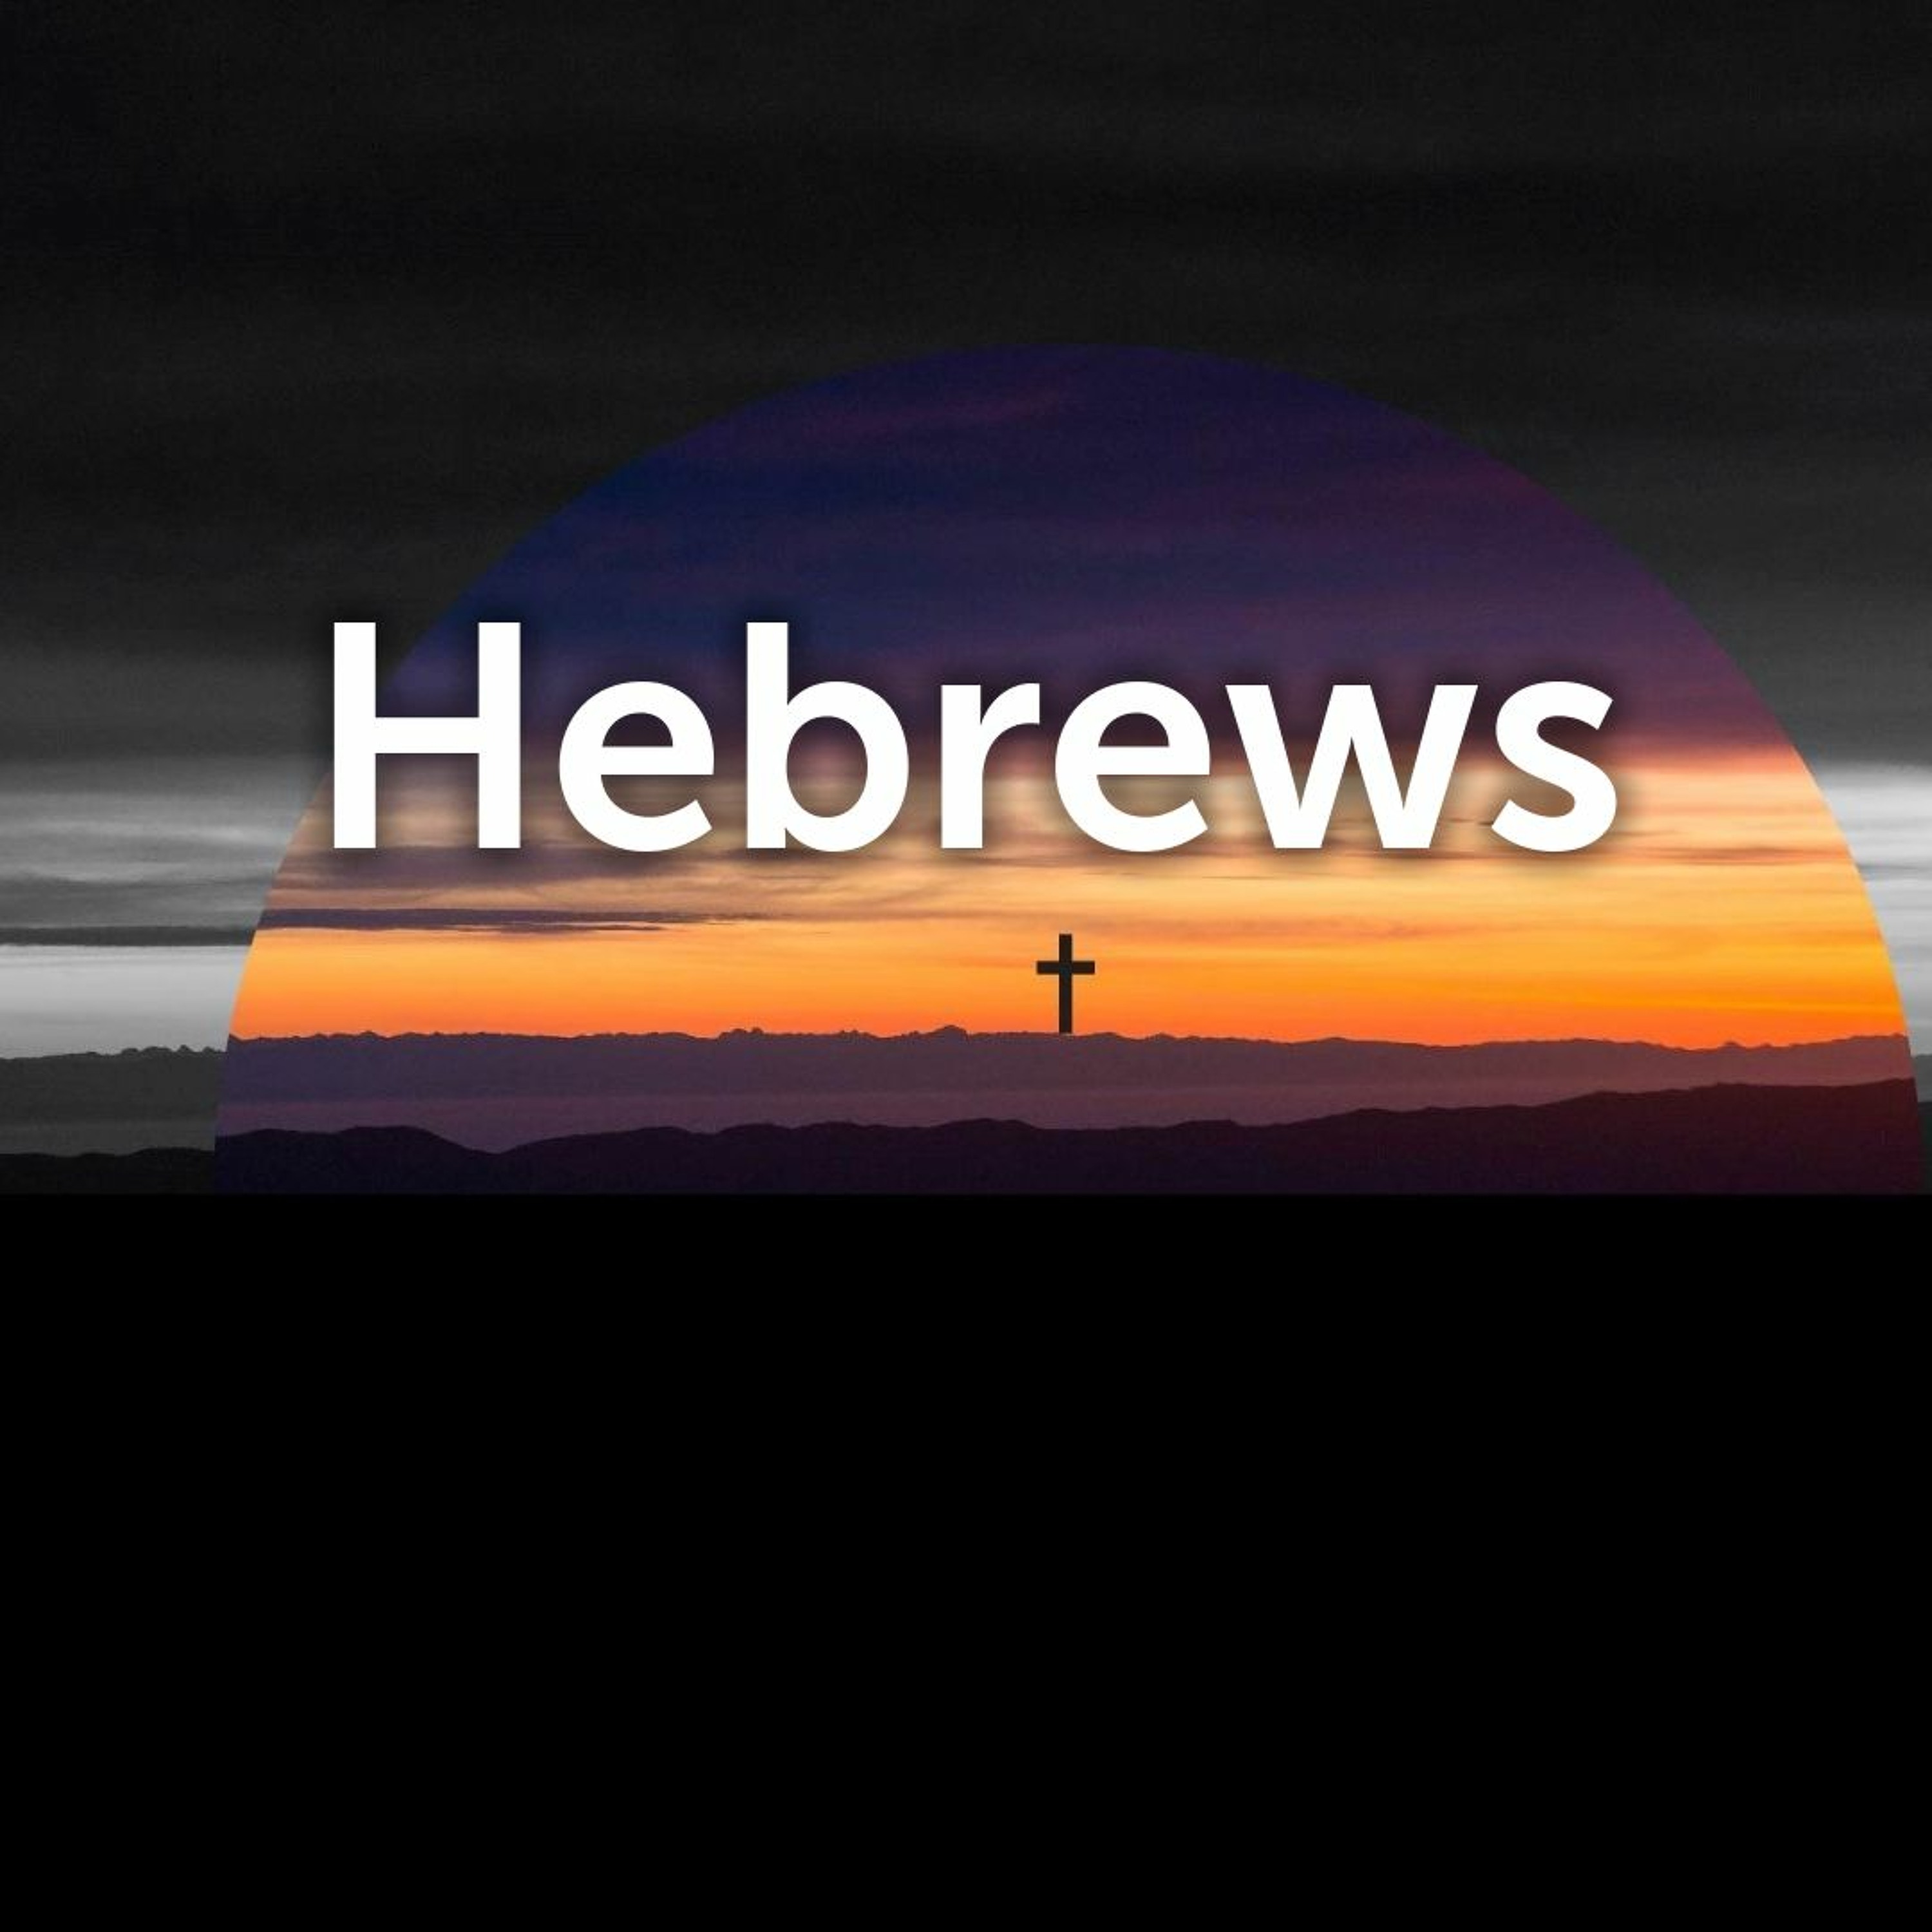 When Shepherds and Sheep Live in Harmony (Hebrews 13:17-19)